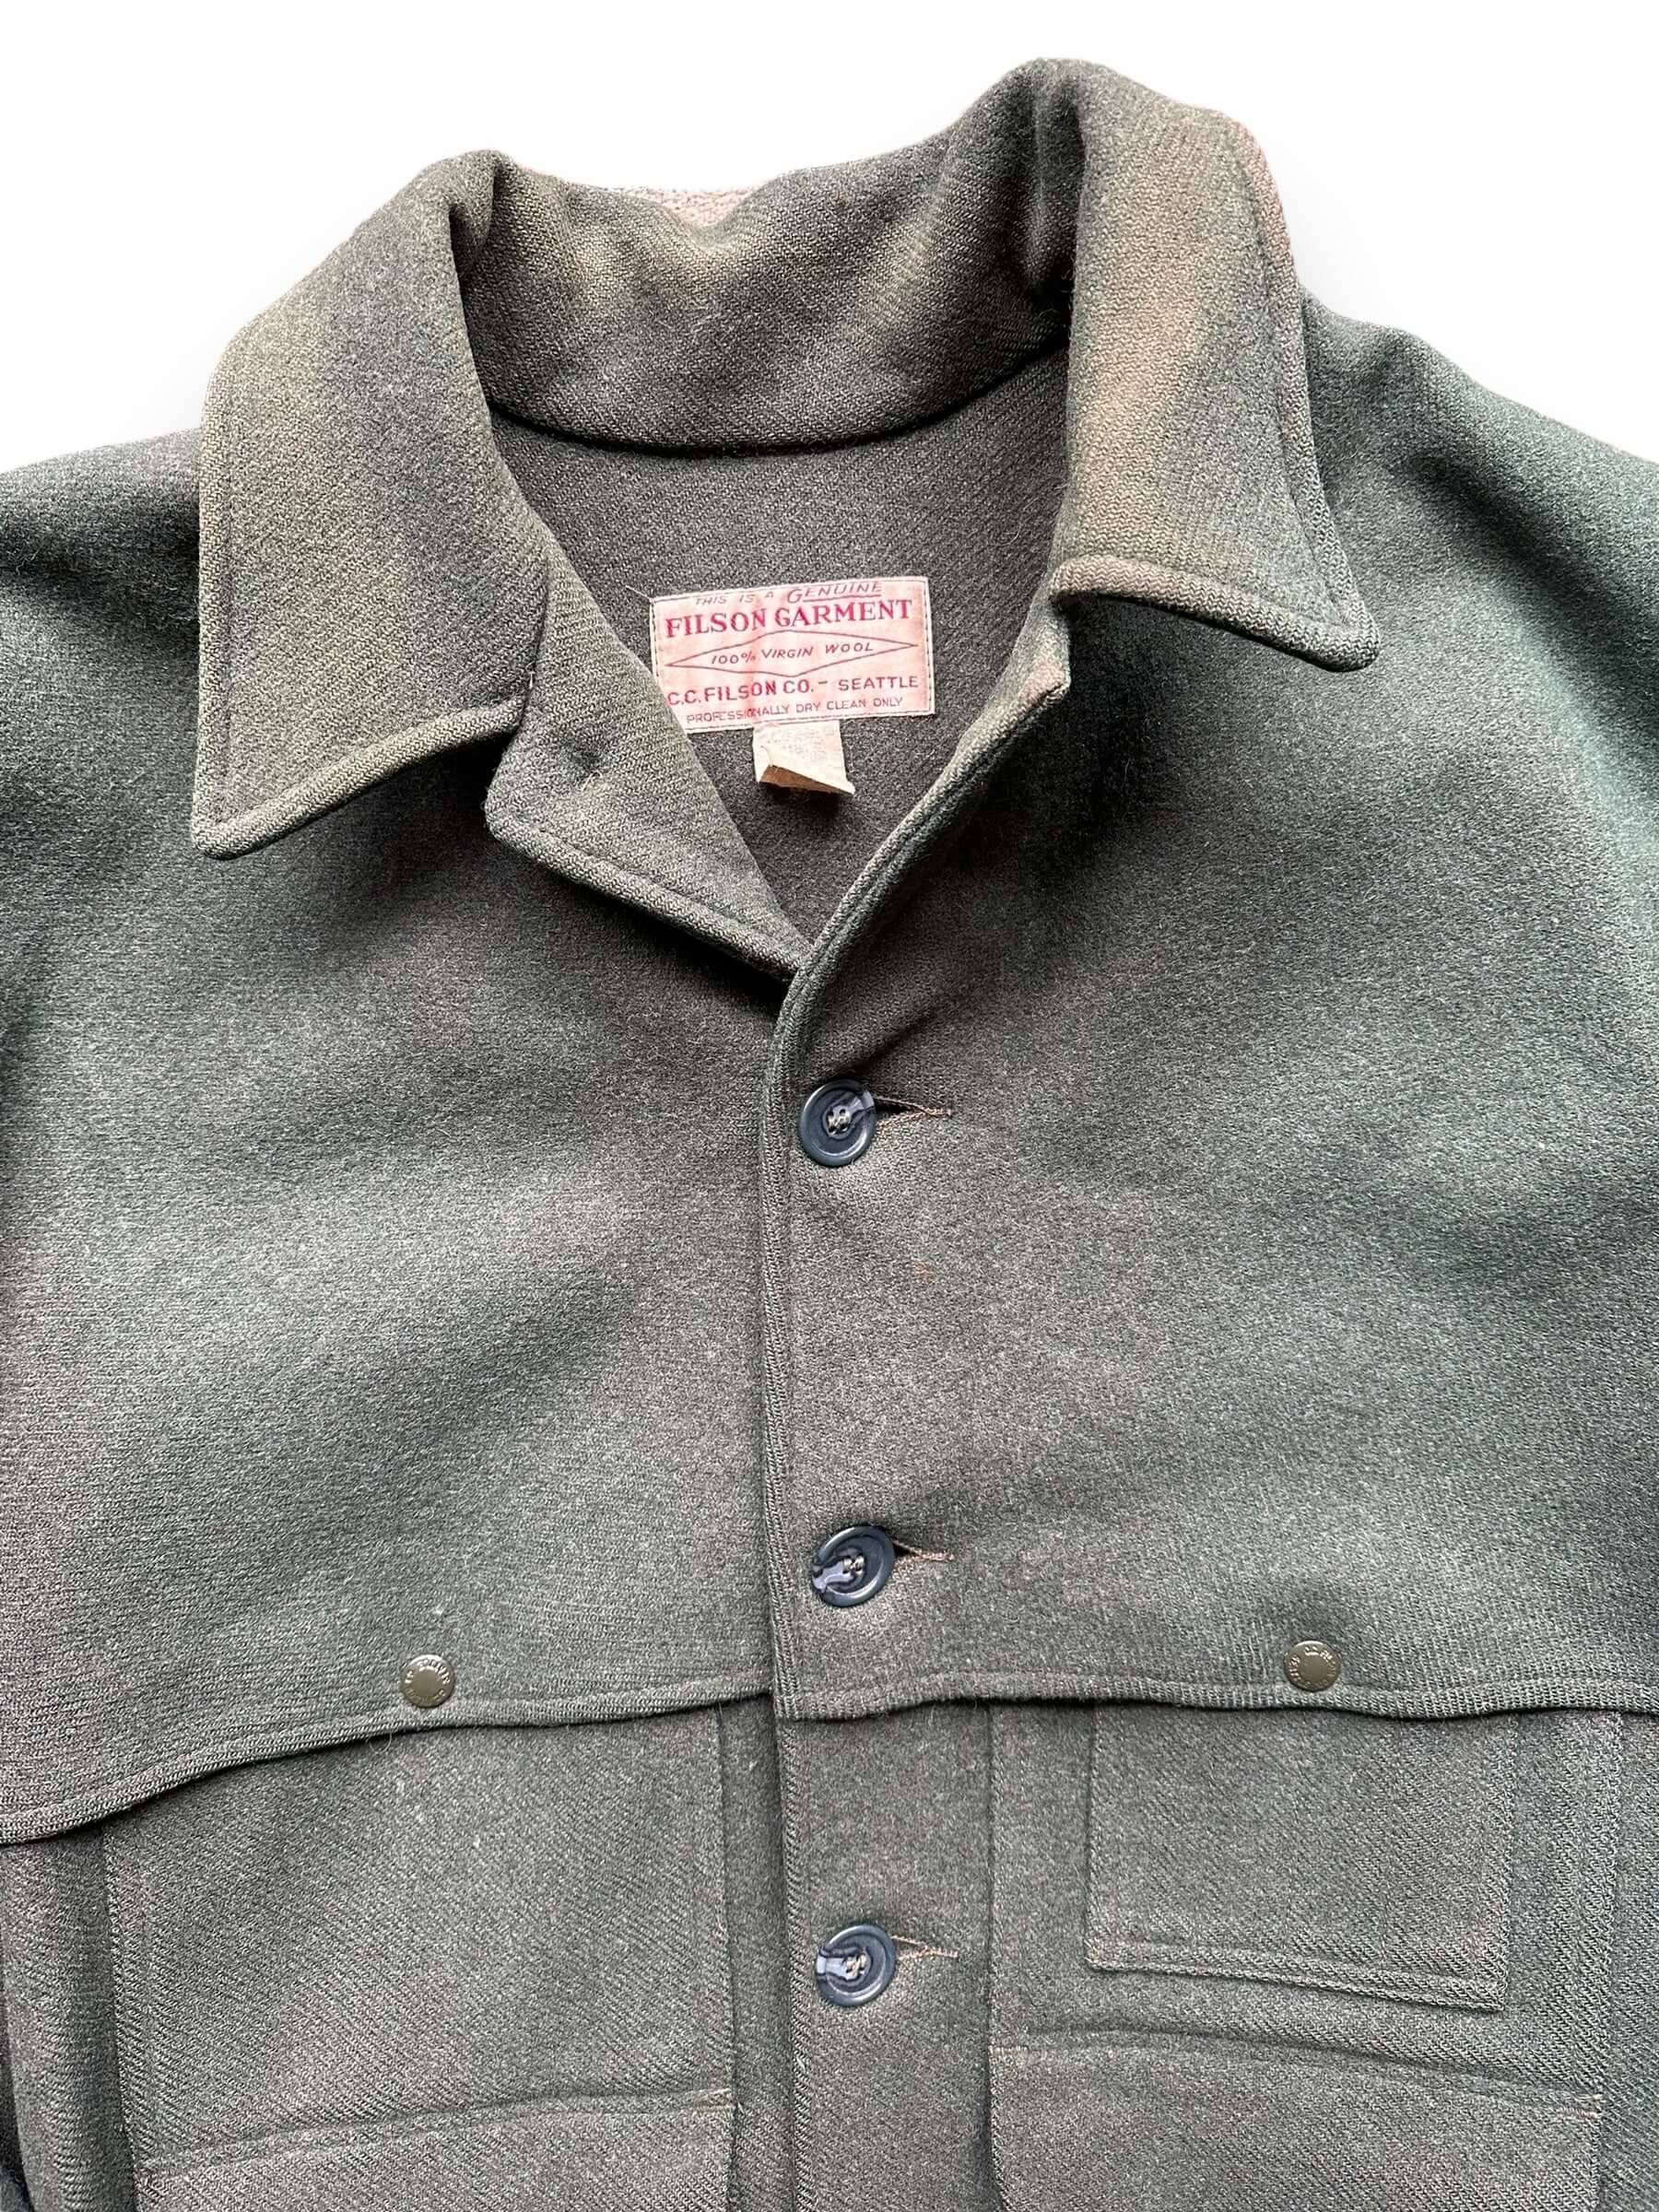 Upper Front Chest View of Vintage Filson Forest Green Double Mackinaw Cruiser SZ 48 |  Vintage Filson Workwear Seattle